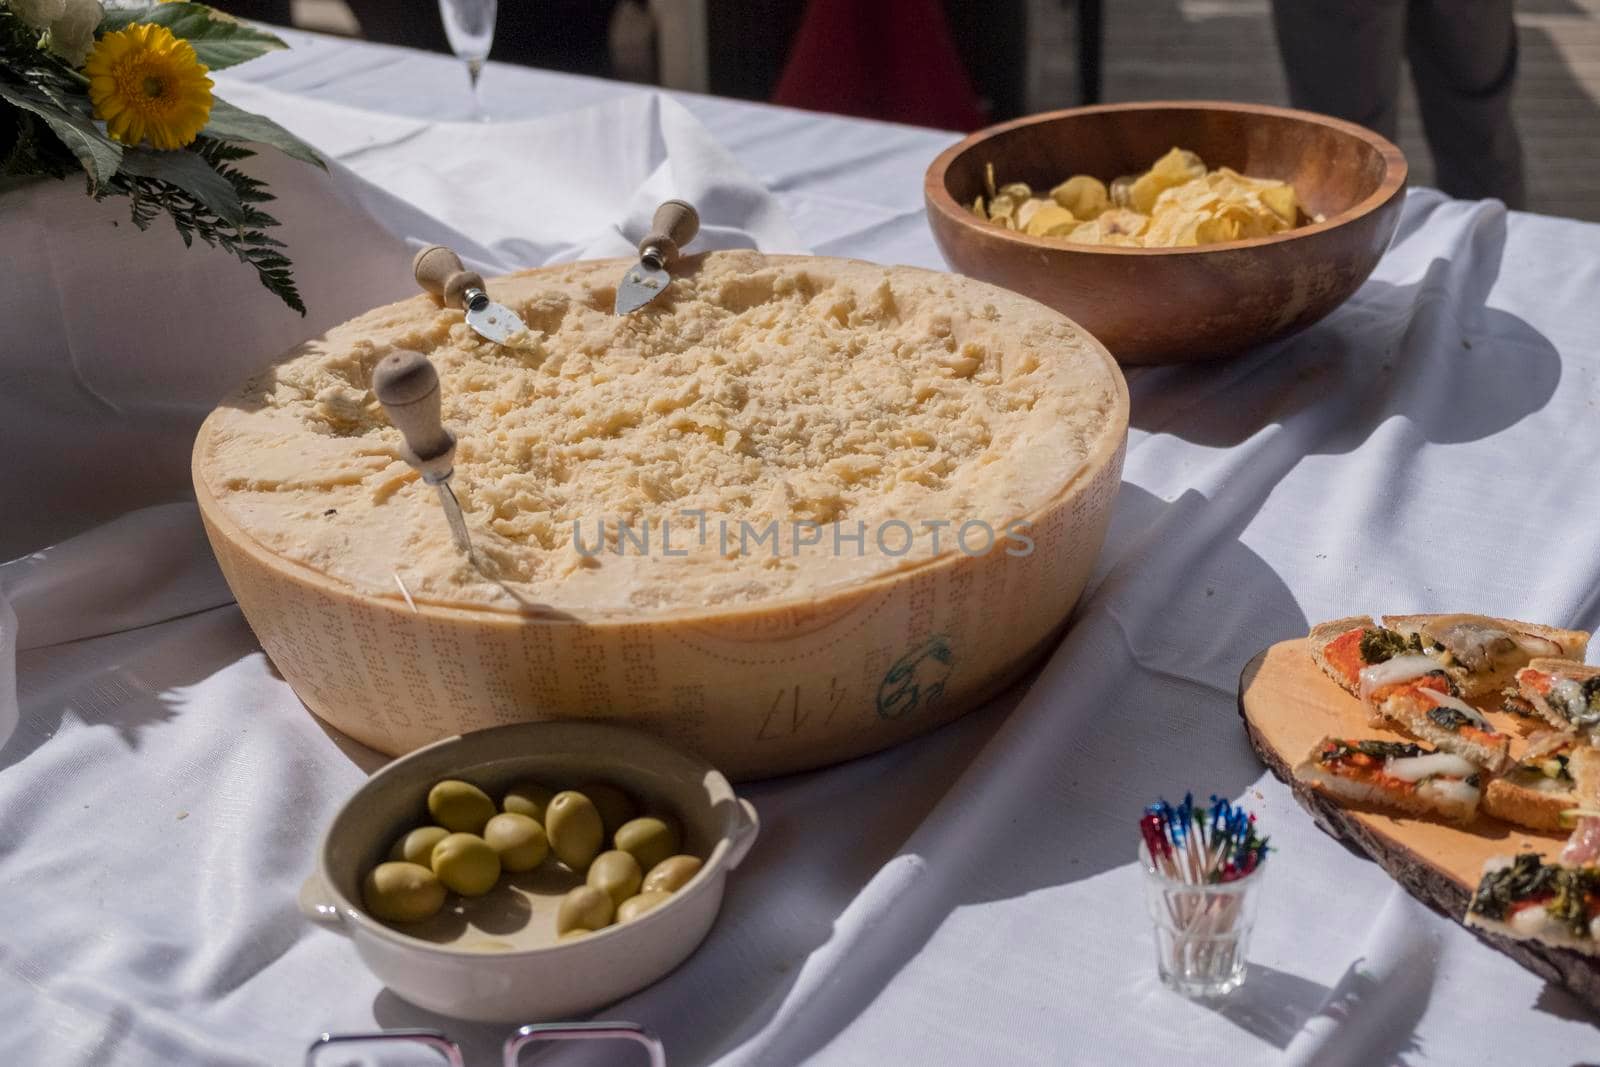 half wheel parmigiano reggiano with cutting knives at wedding reception. High quality photo